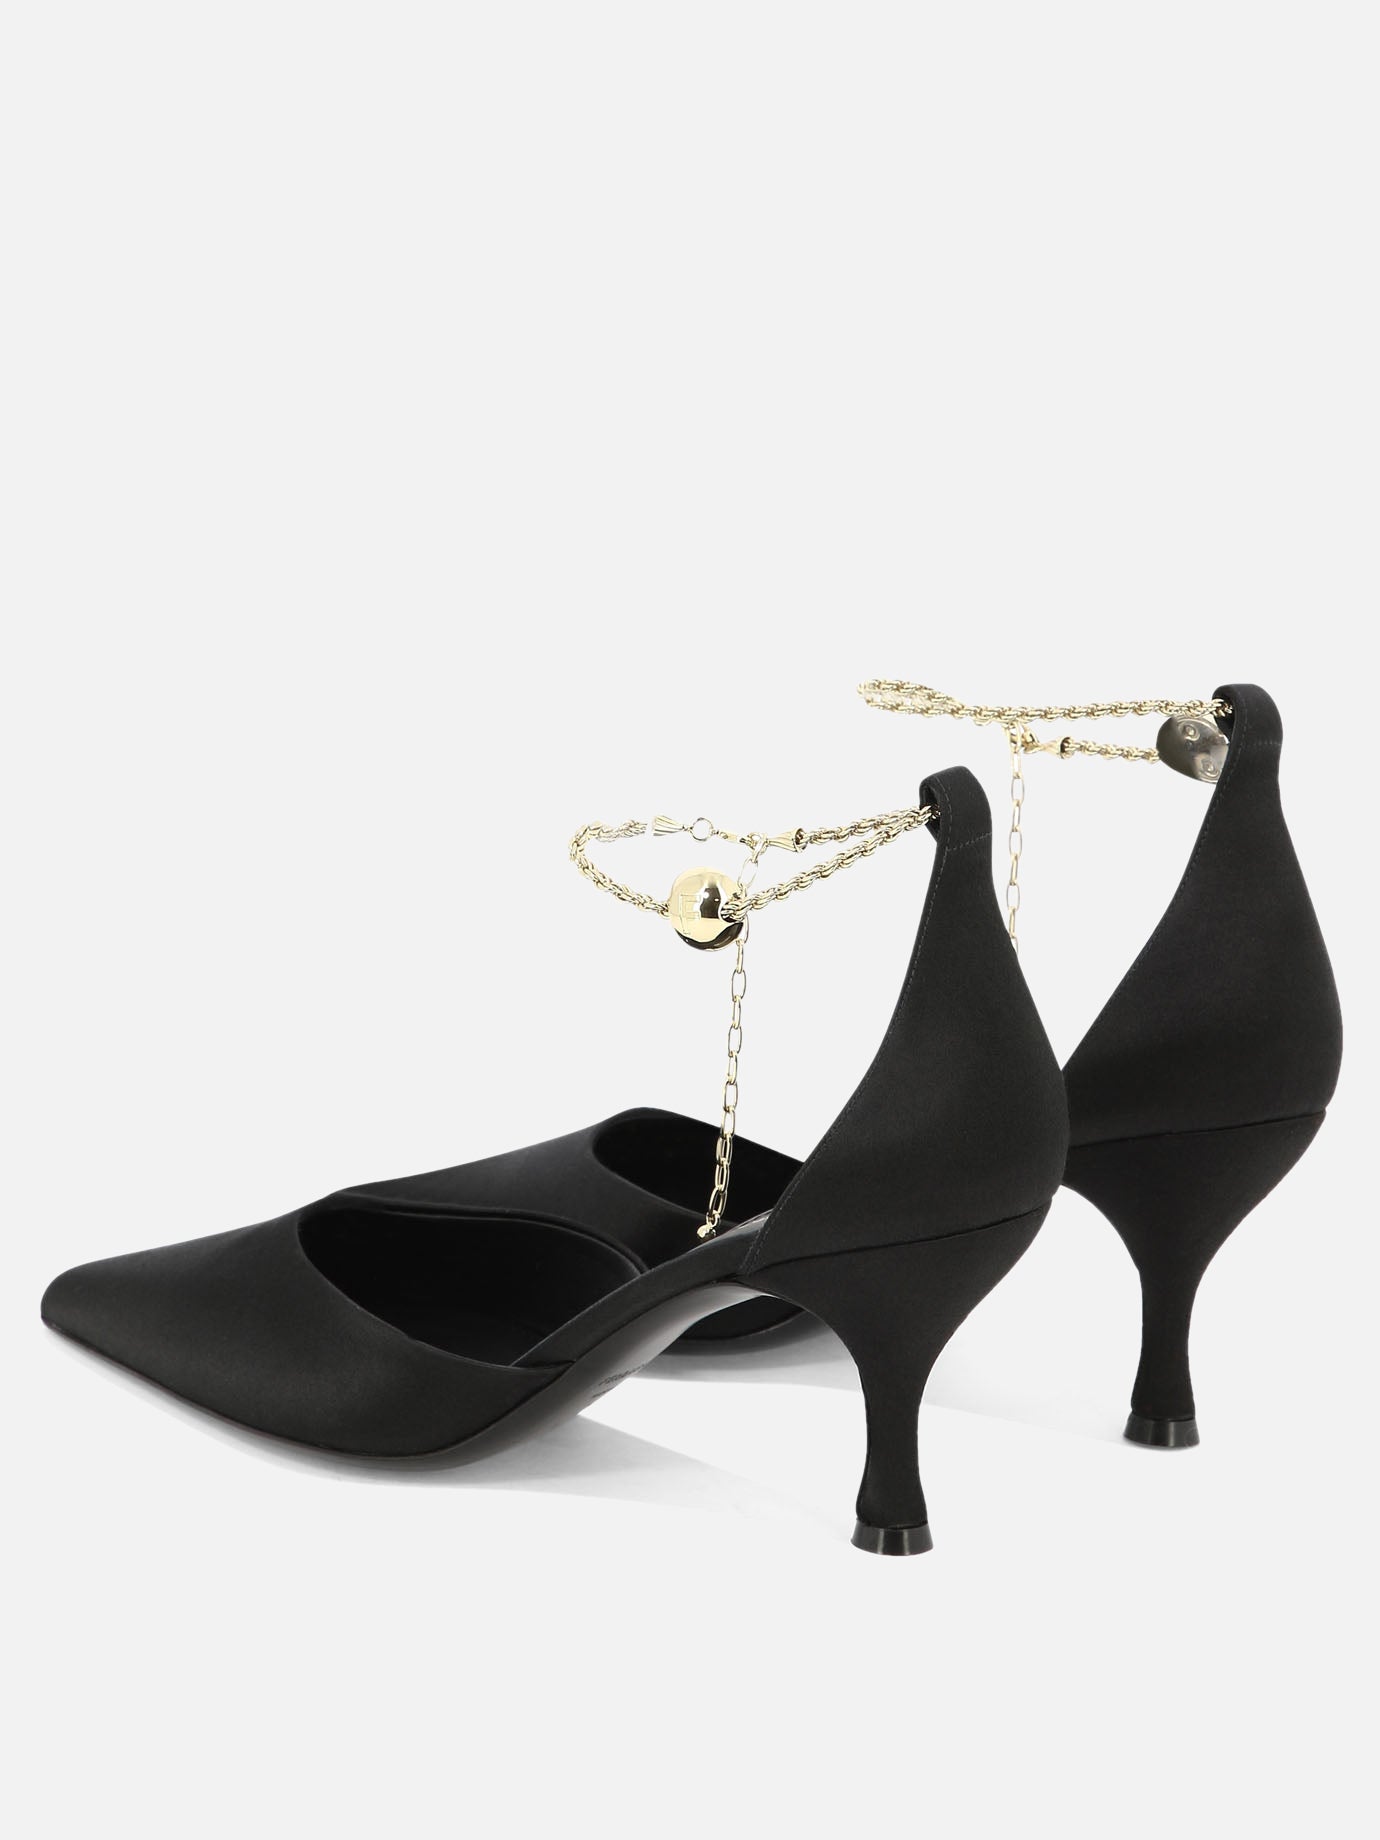 Pumps with ankle chain